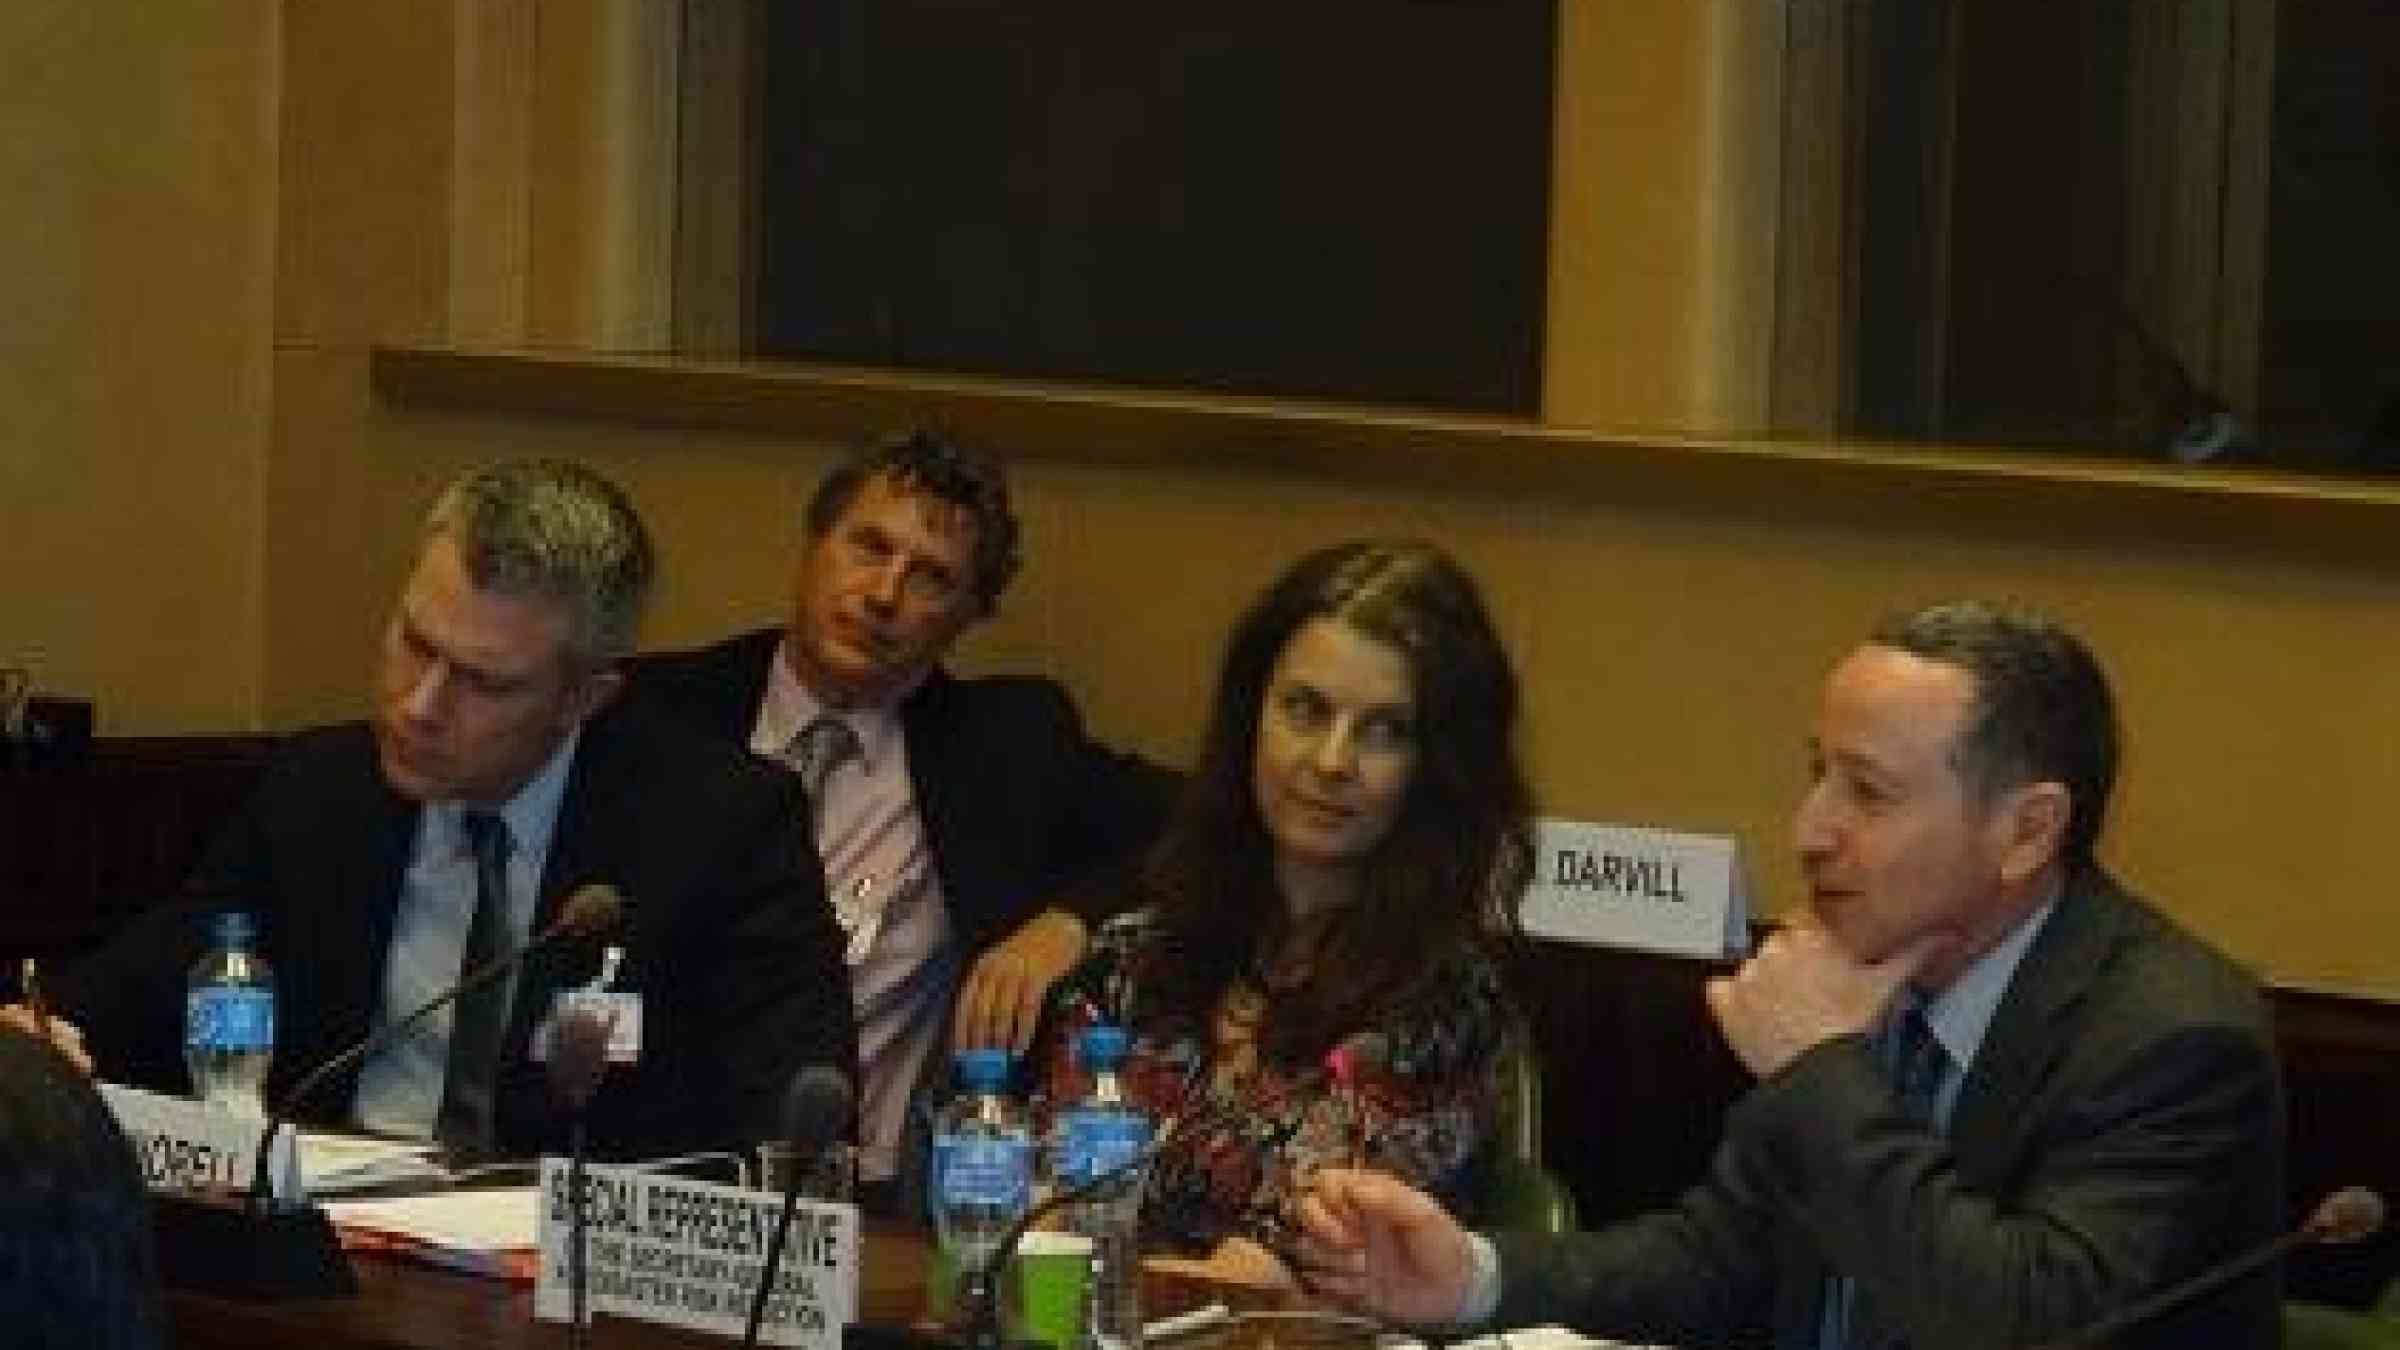 UNISDR head, Robert Glasser (right) in discussion with presenters at the April UNISDR Support Group Meeting, (from left) Benny Jansson, MSB-Sweden, Steve Darvill, Australian Government, and Petronella Norell, MSB-Sweden (Photo: UNISDR)